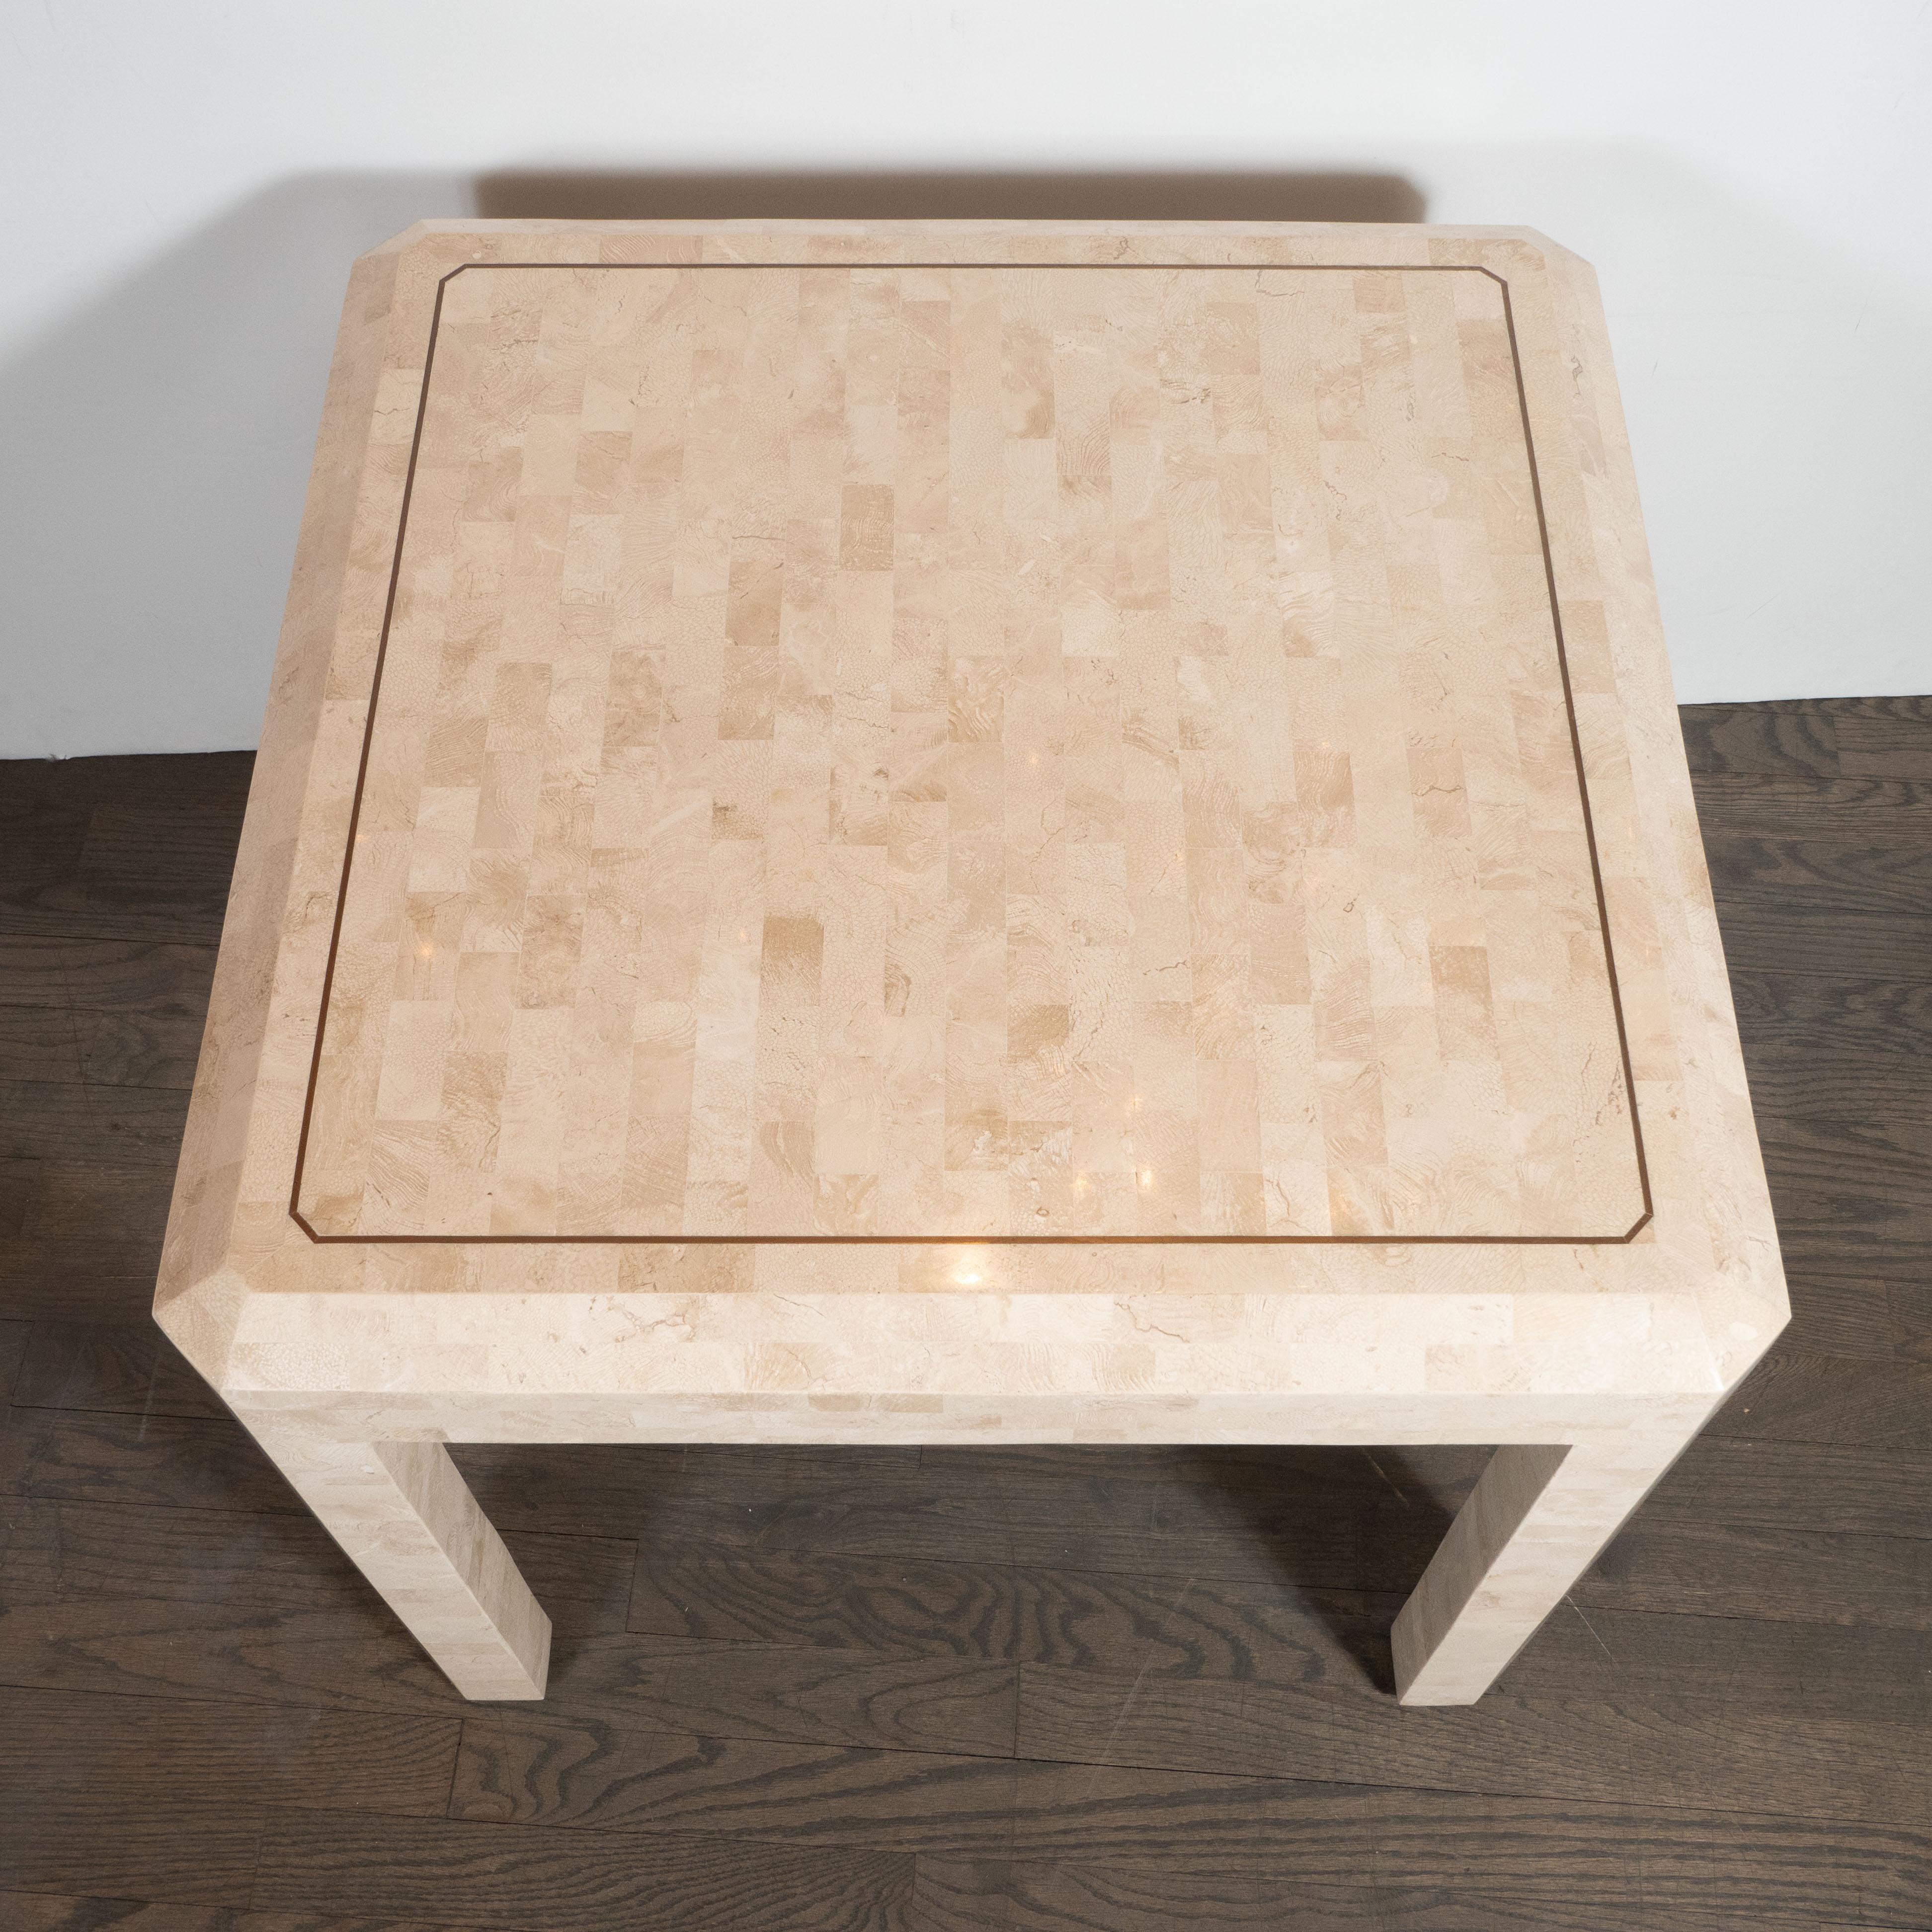 Philippine Pair of Midcentury Brass and Tessellated Stone Side/End Tables by Maitland Smith